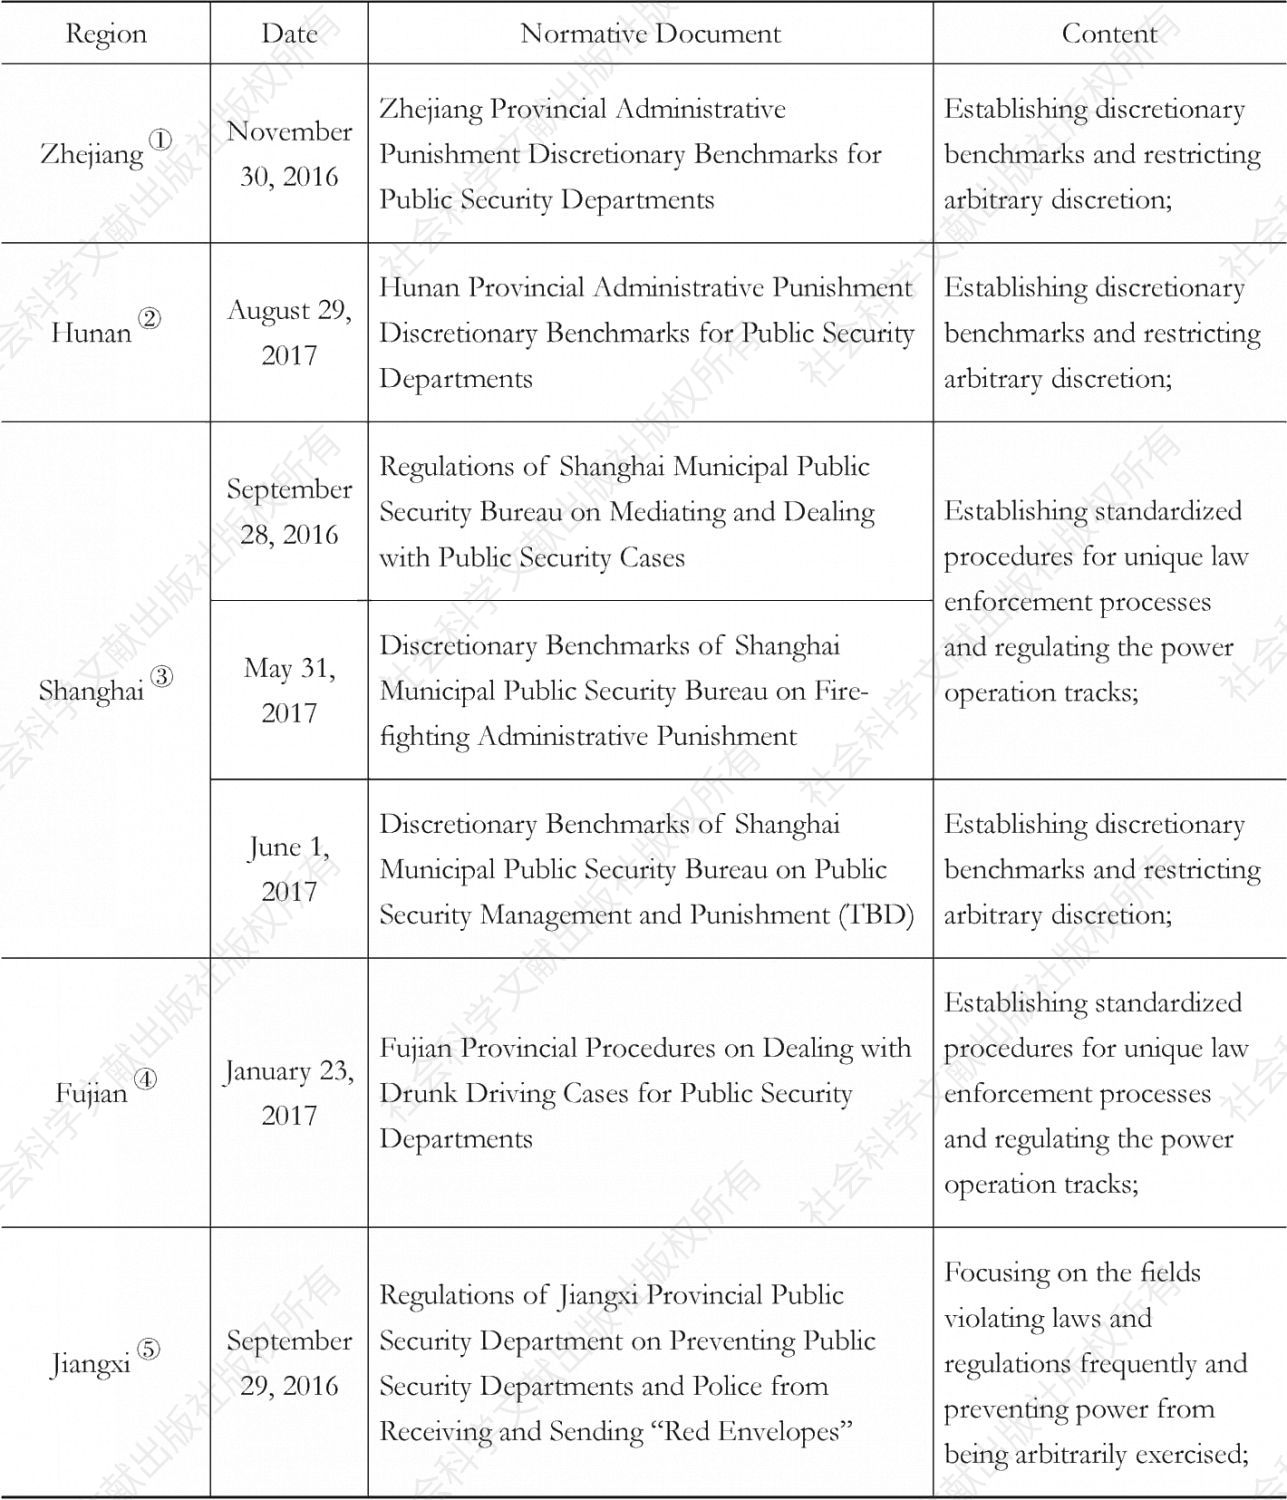 Table 1 Normative Documents of Some Public Security Departments in Regulating Administrative Punishment Discretionary Benchmarks